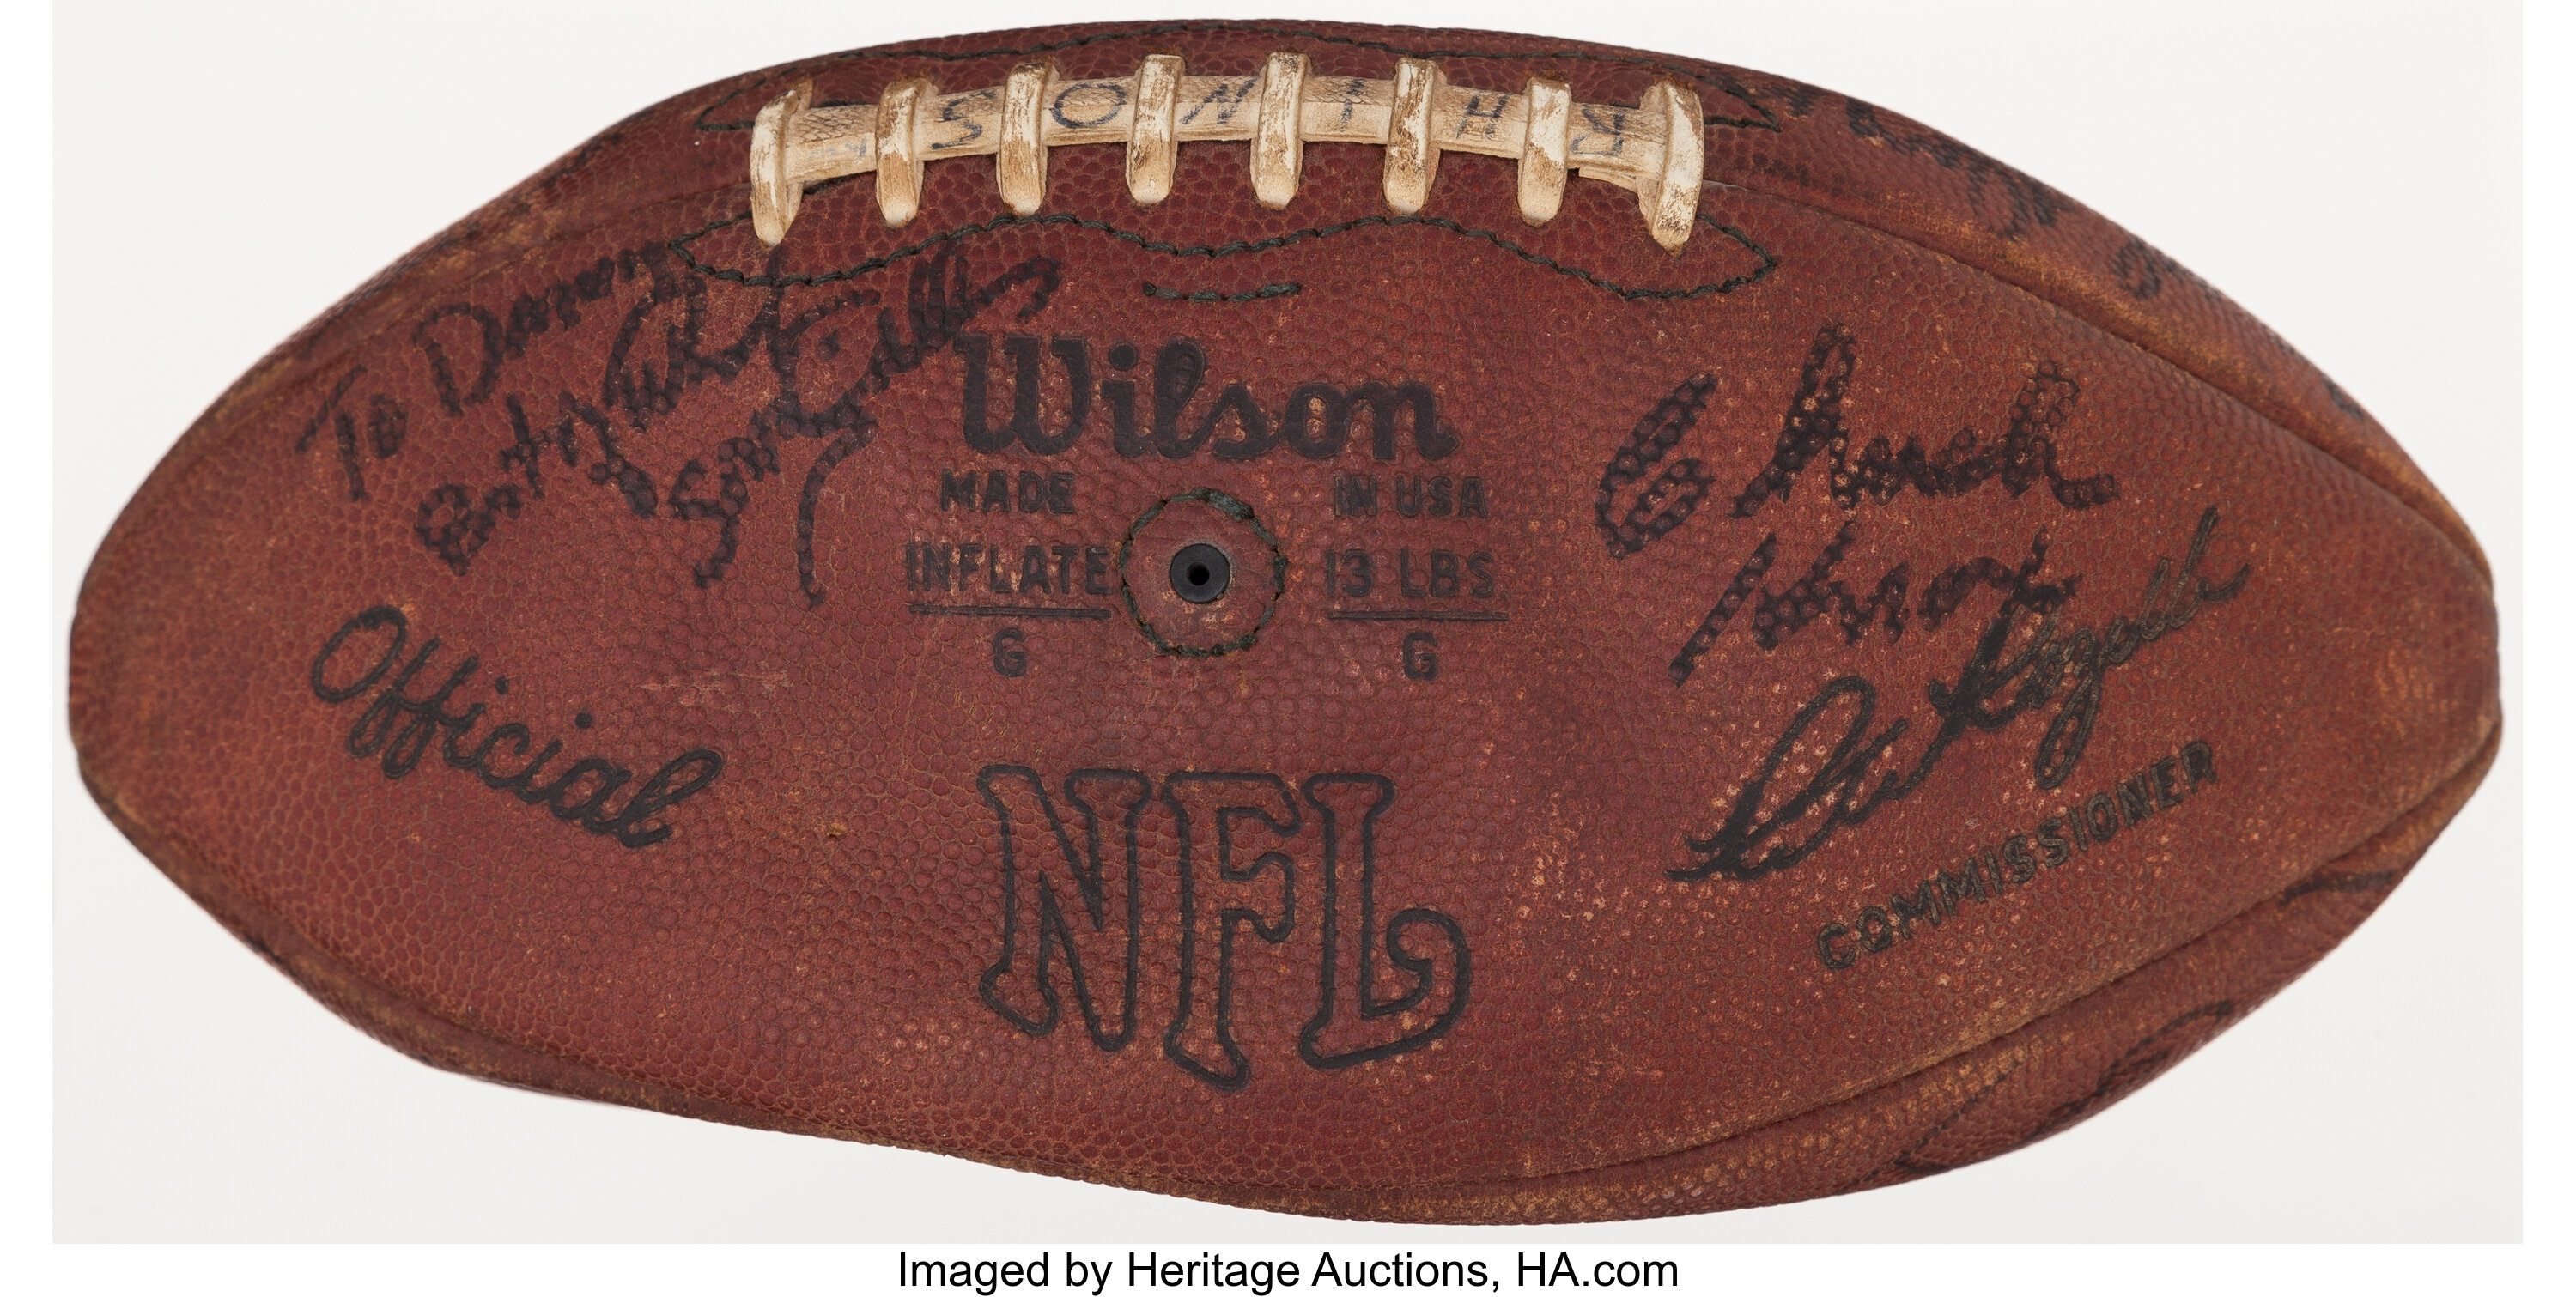 1977 Los Angeles Rams Team Signed Football - With Namath!